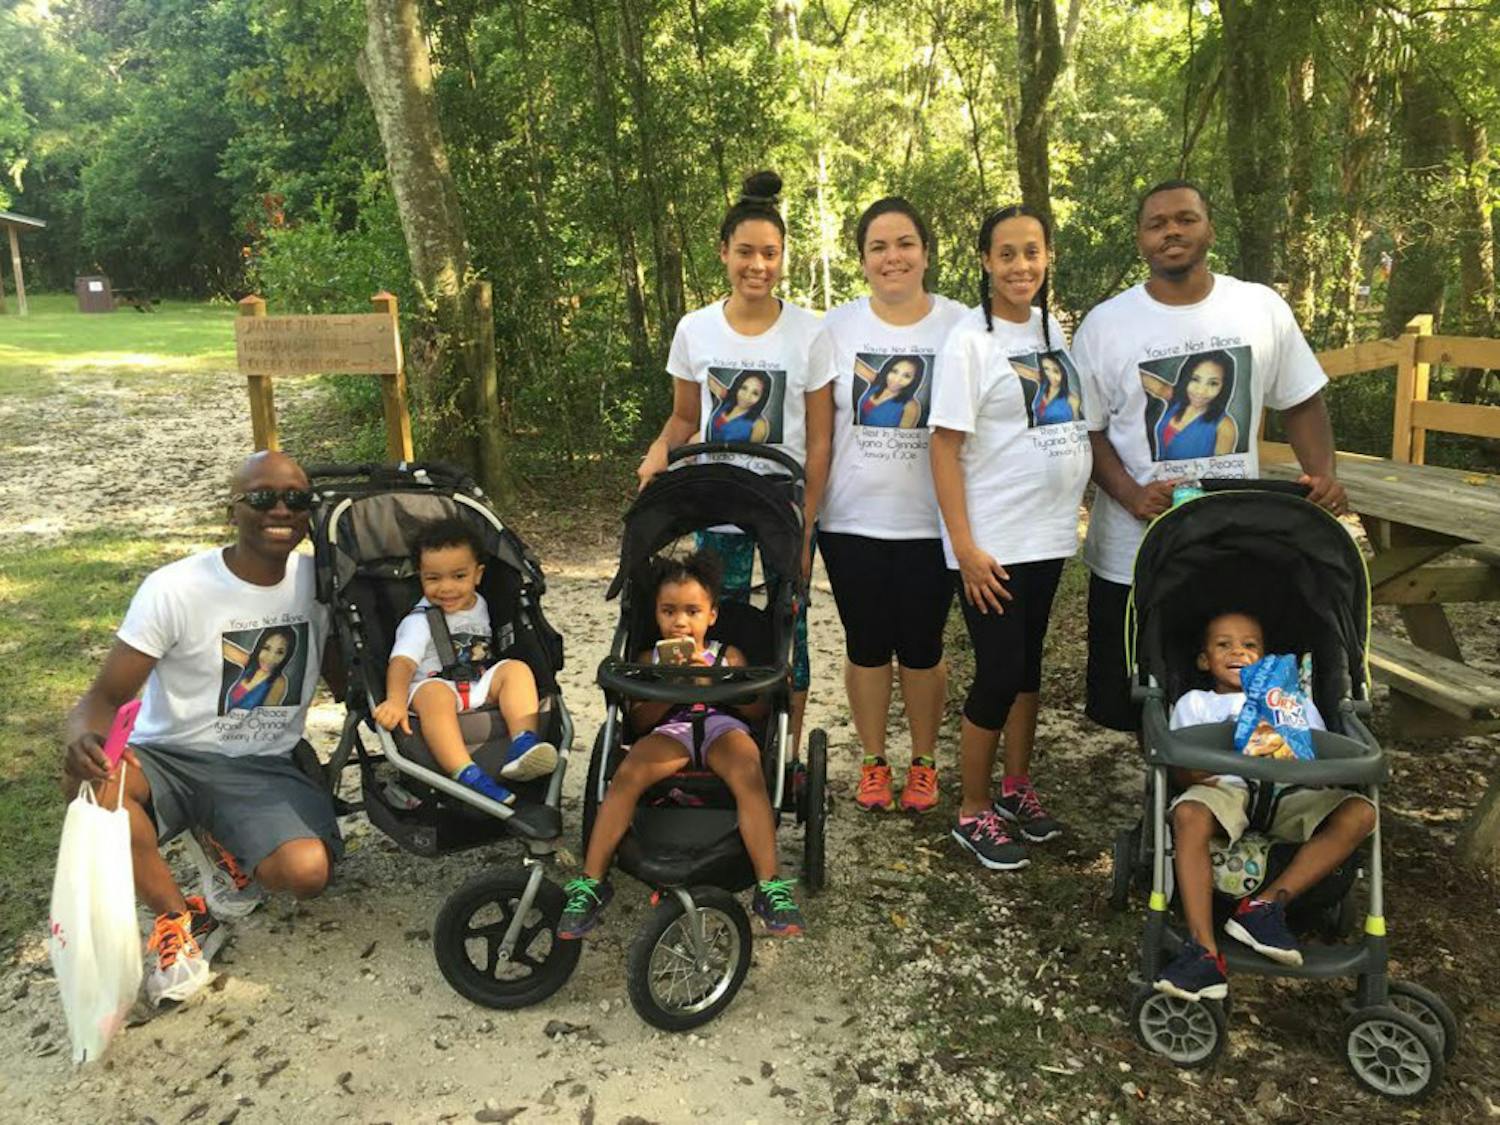 As a part of World Suicide Prevention Day, about 100 Gainesville residents participated in a 5-kilometer run Saturday at Cofrin Nature Park. The run was held by The Friends of the Alachua County Crisis Center.